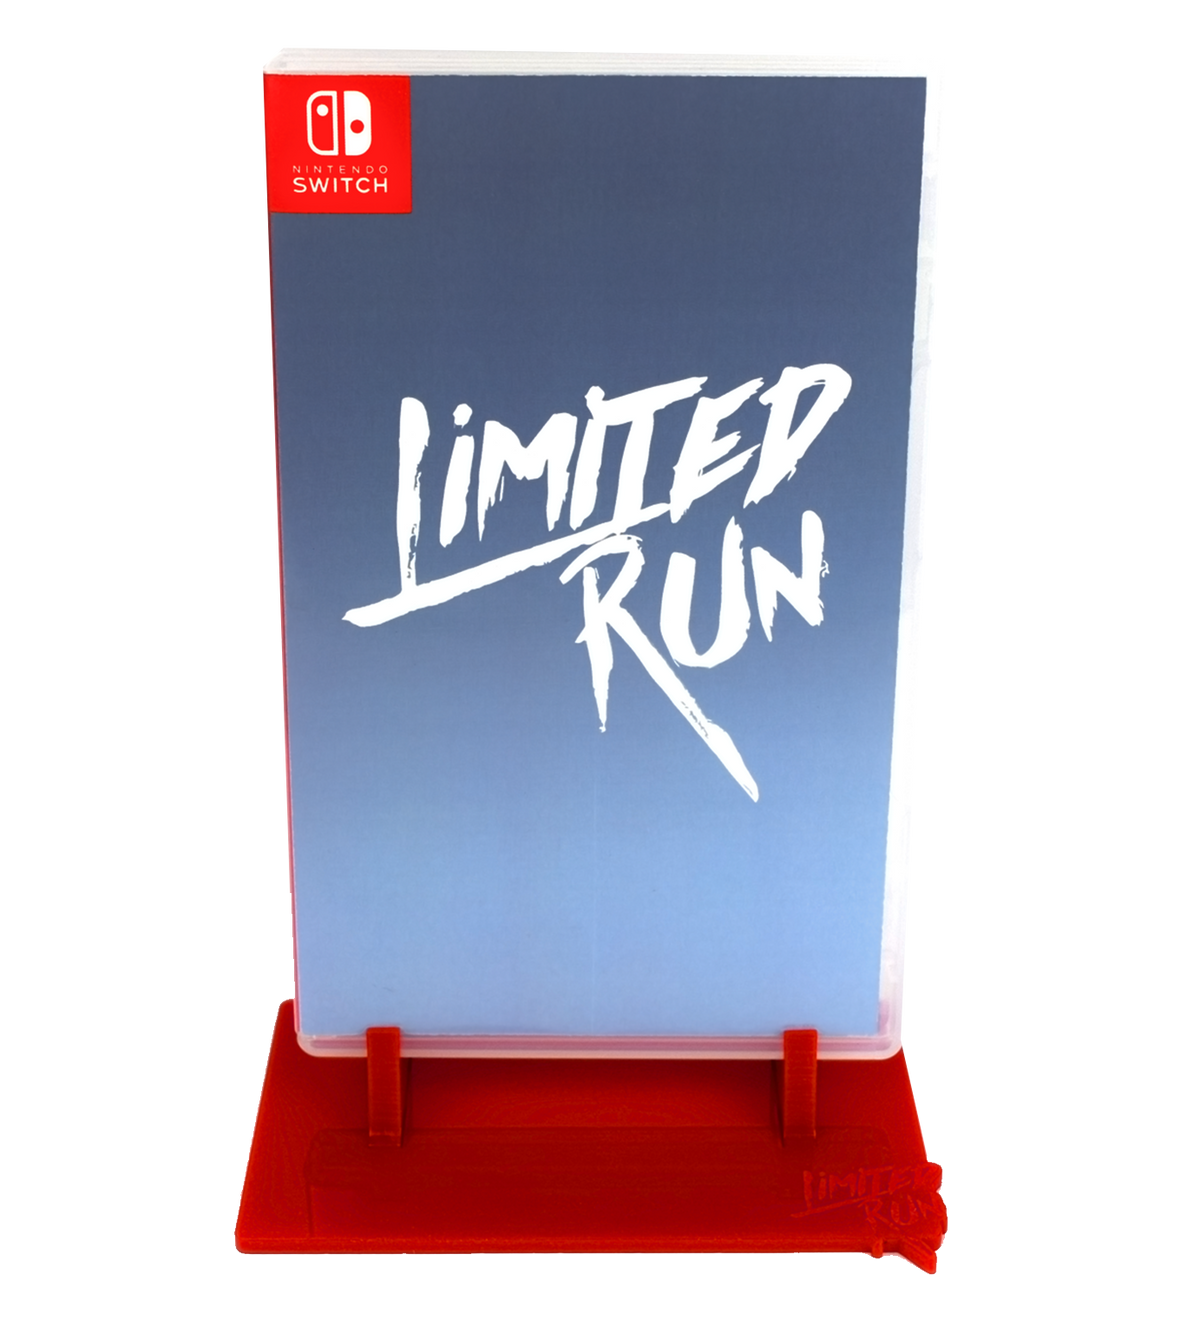 Exert at opfinde grim Limited Run Switch Game Display Stand – Limited Run Games